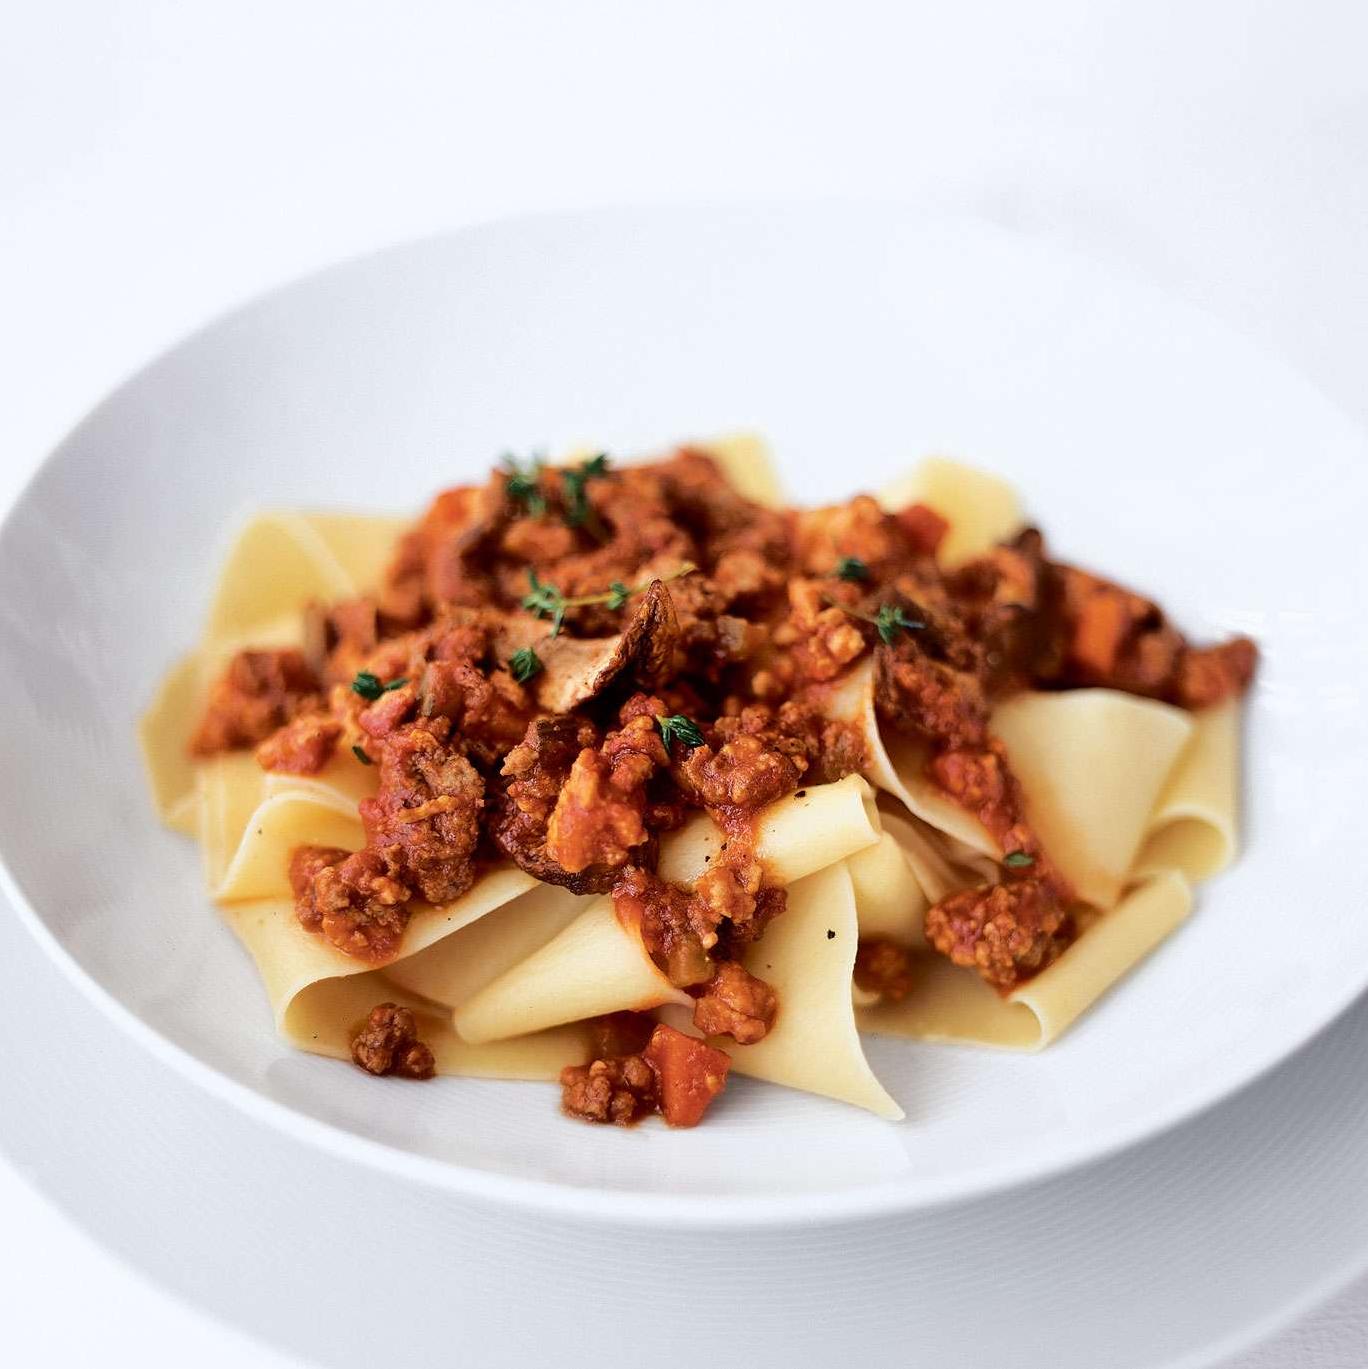 Pappardelle With Red Wine and Meat Ragù